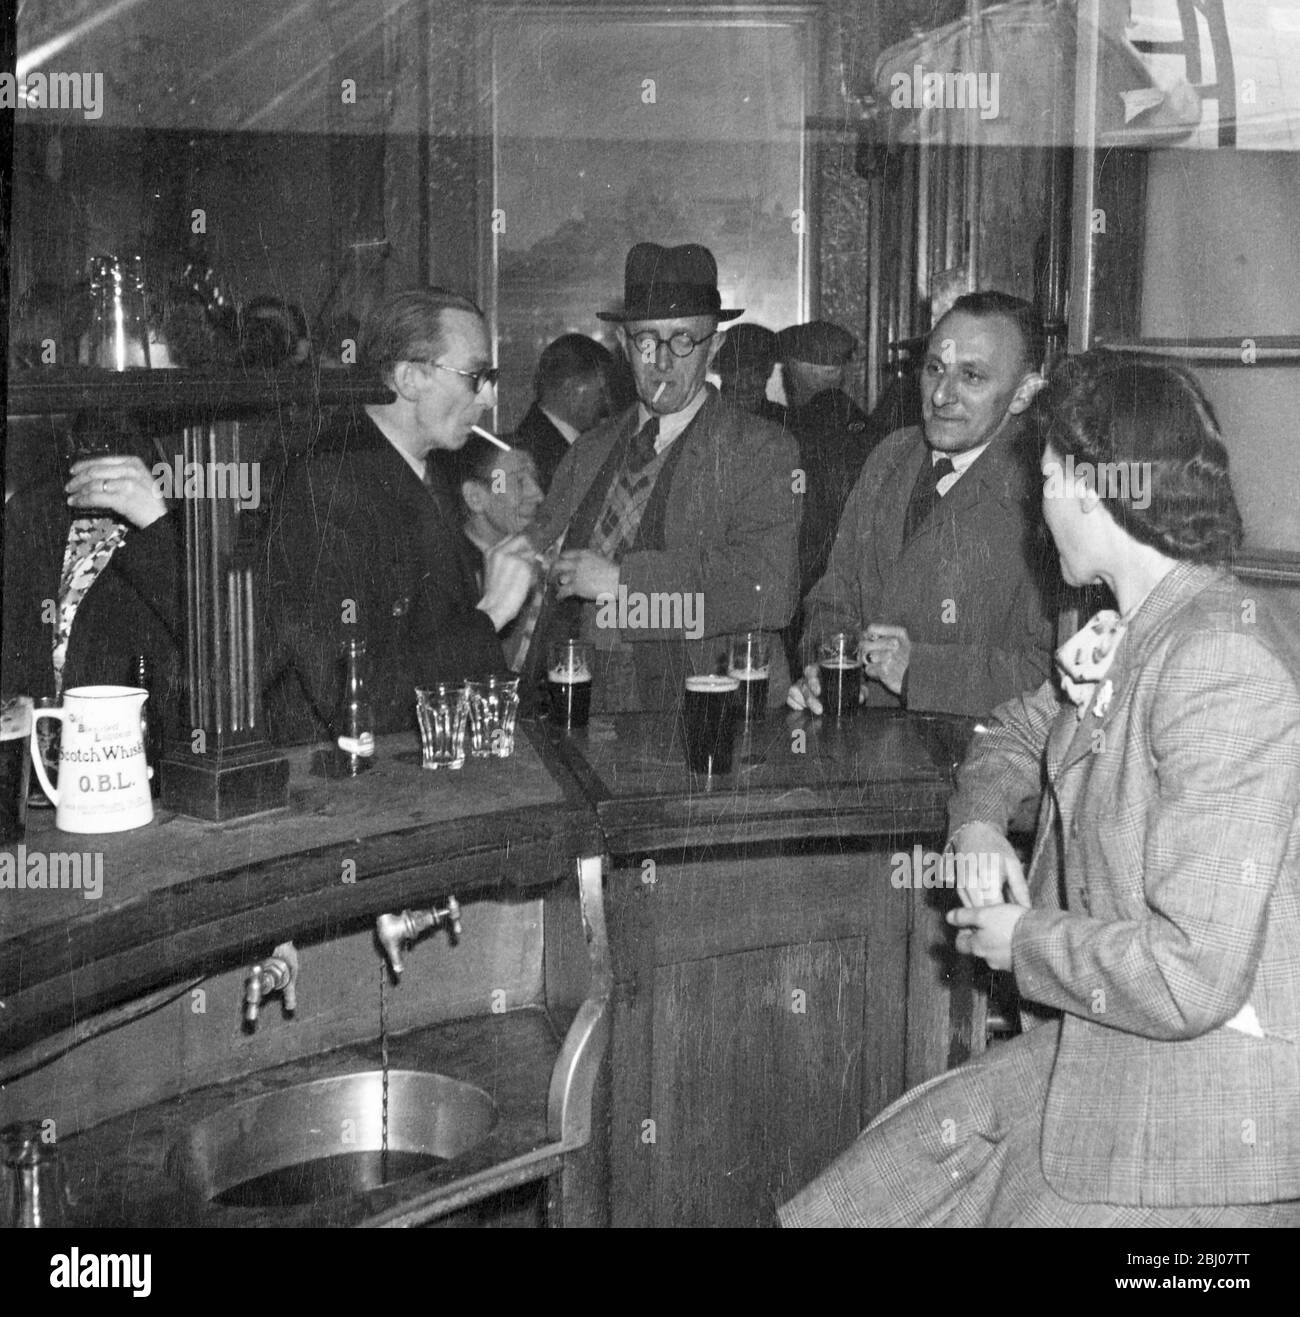 Men drinking and smoking at a bar with a barmaid waiting on them. - - [no caption, location or date] Stock Photo